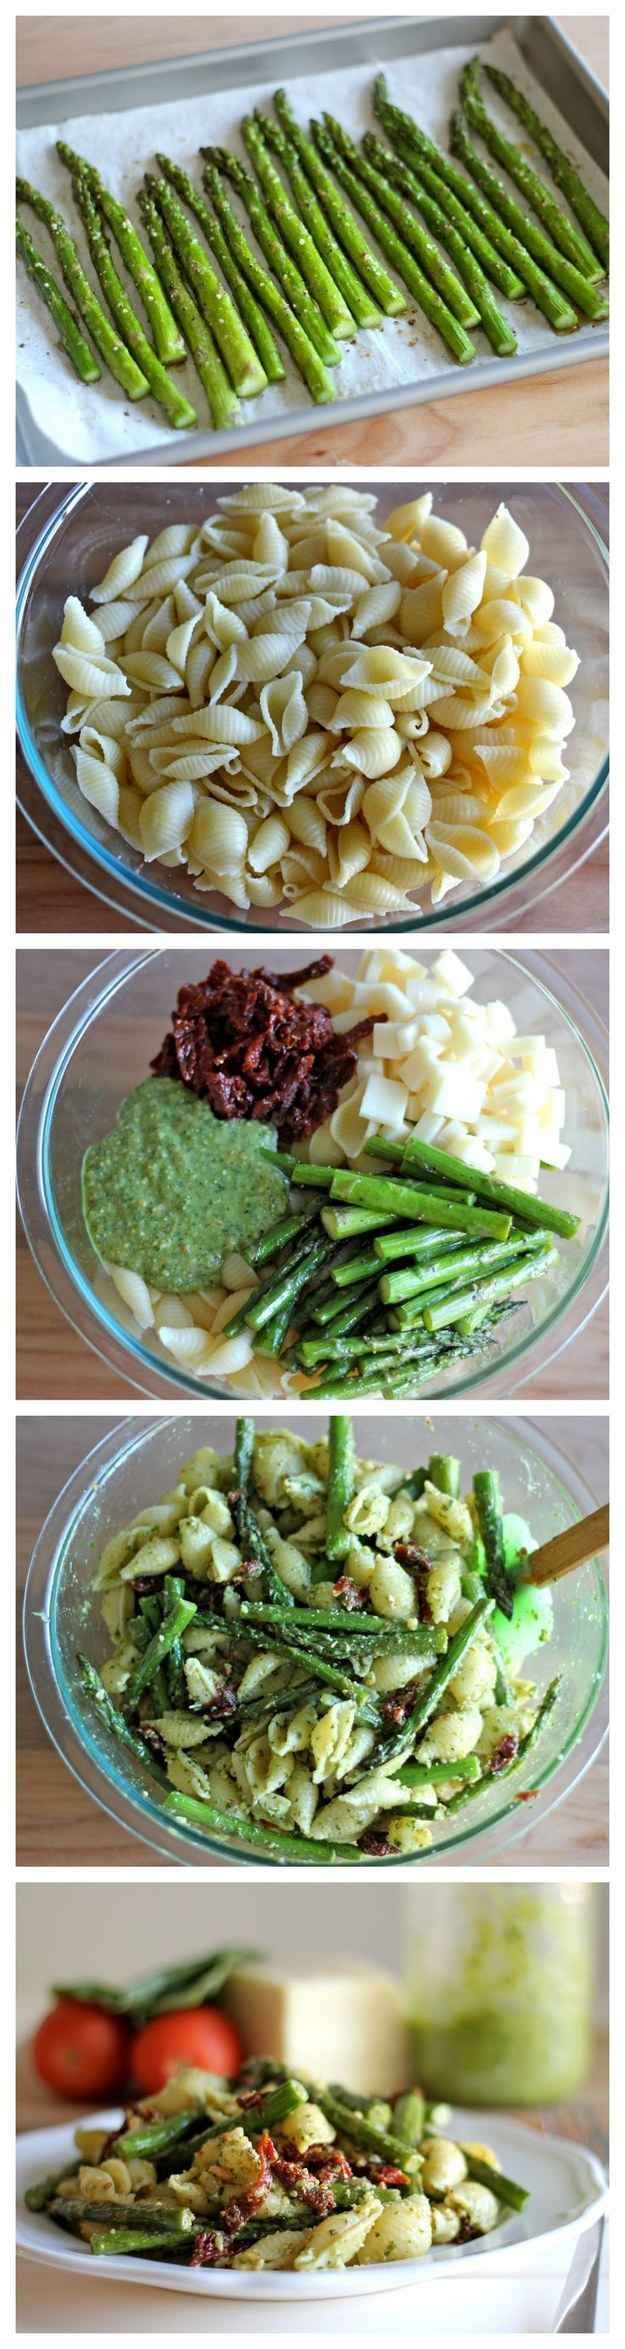 Pesto Pasta with Sundried Tomatoes and Roasted Asparagus | 7 Quick Dinners To Make This Week